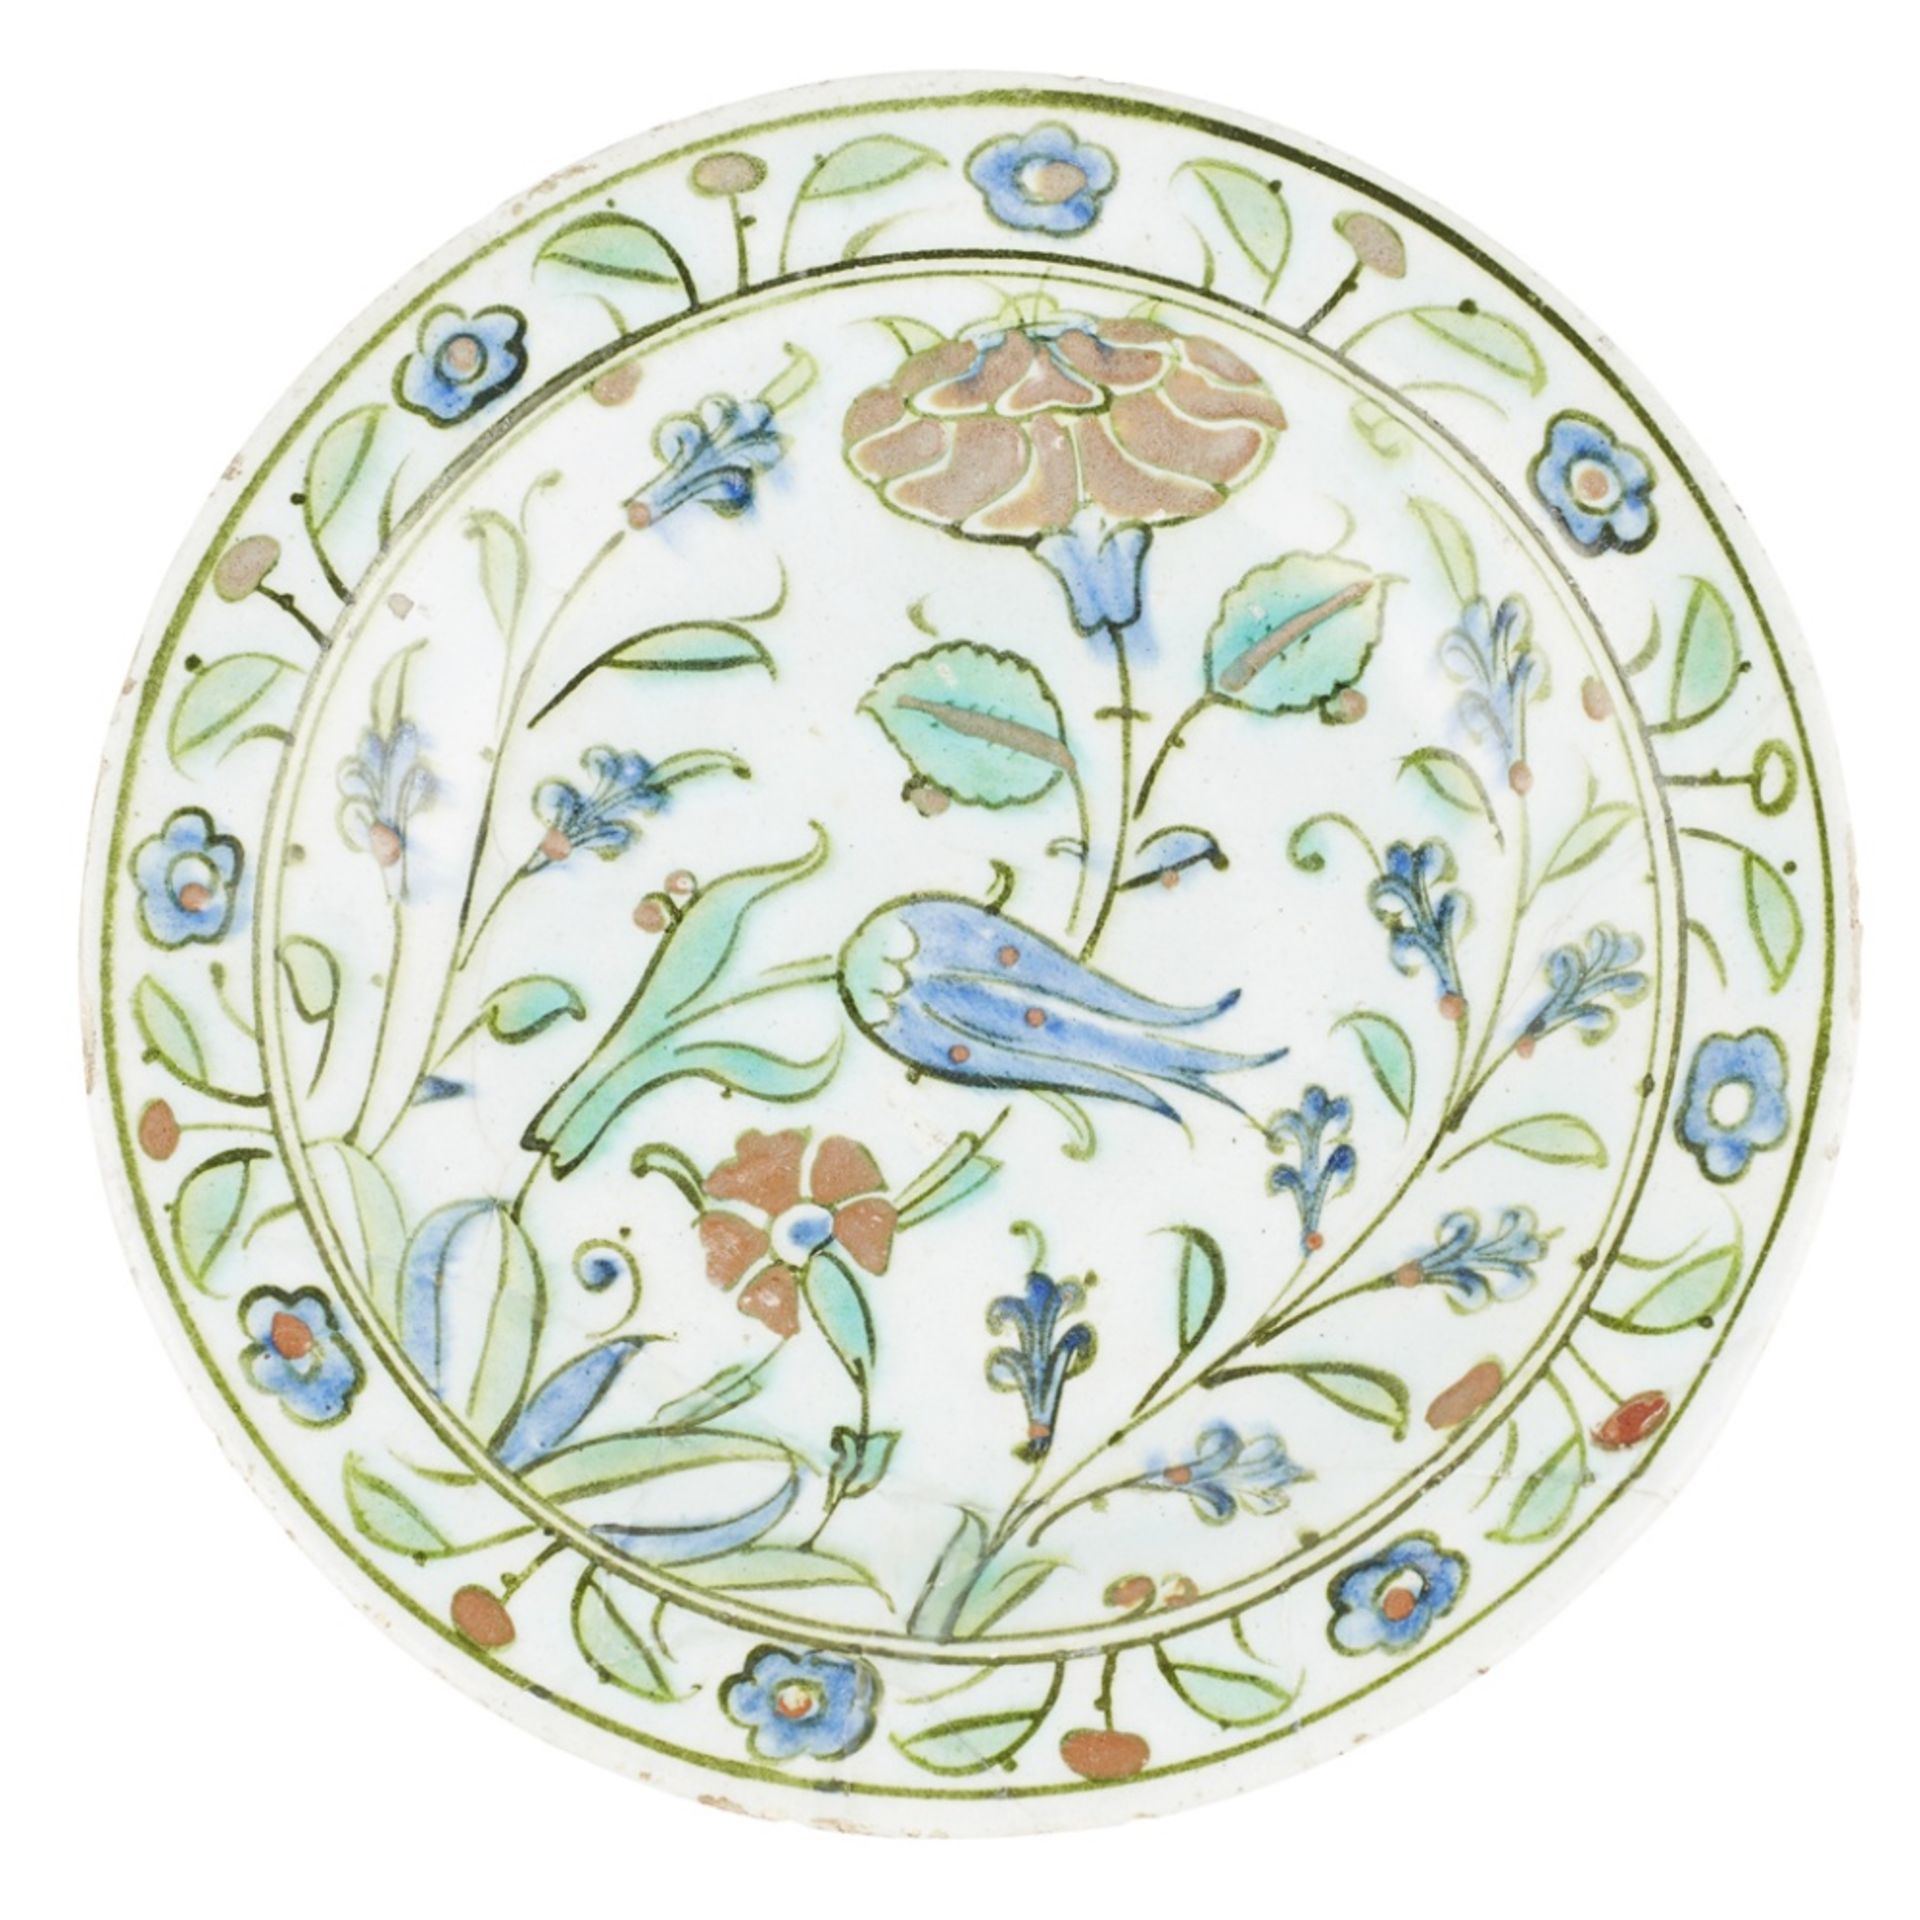 IZNIK UNDERGLAZE-PAINTED POTTERY DISH17TH CENTURY with a flattened rim and shallow well, decorated